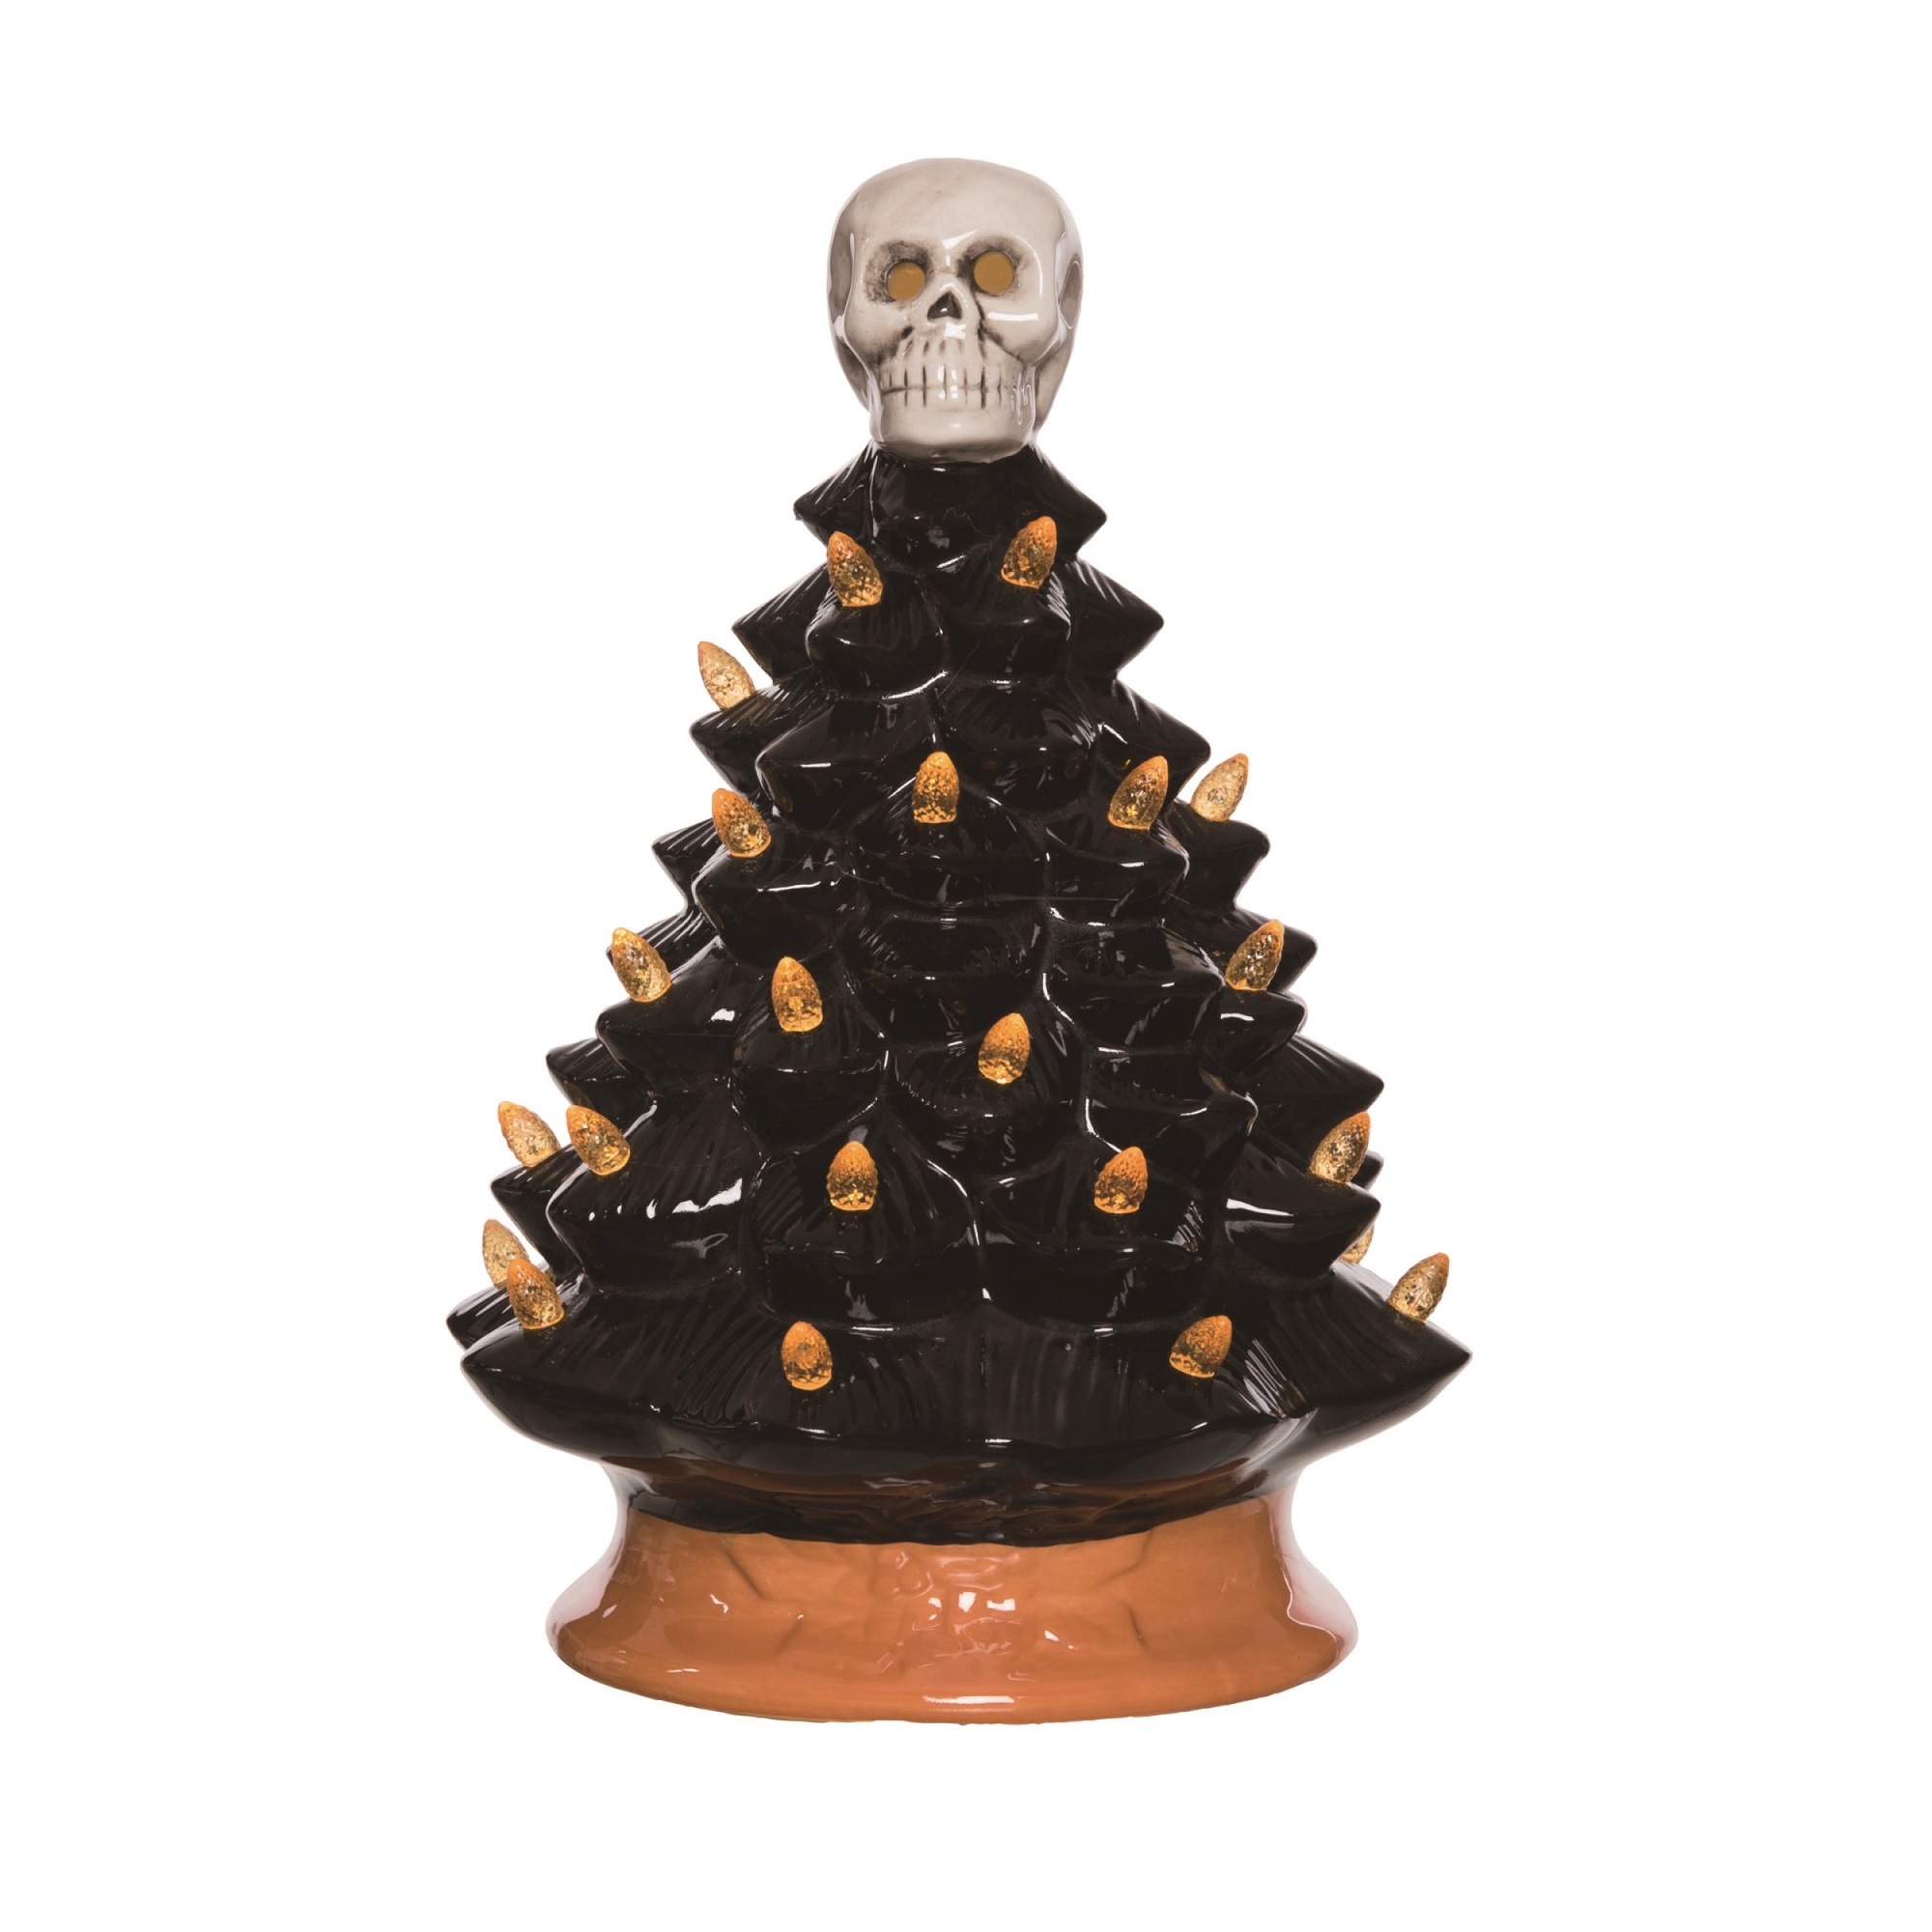 Contemporary Home Living 10" Pre-Lit Black and Orange Vintage Halloween Tree with Skull